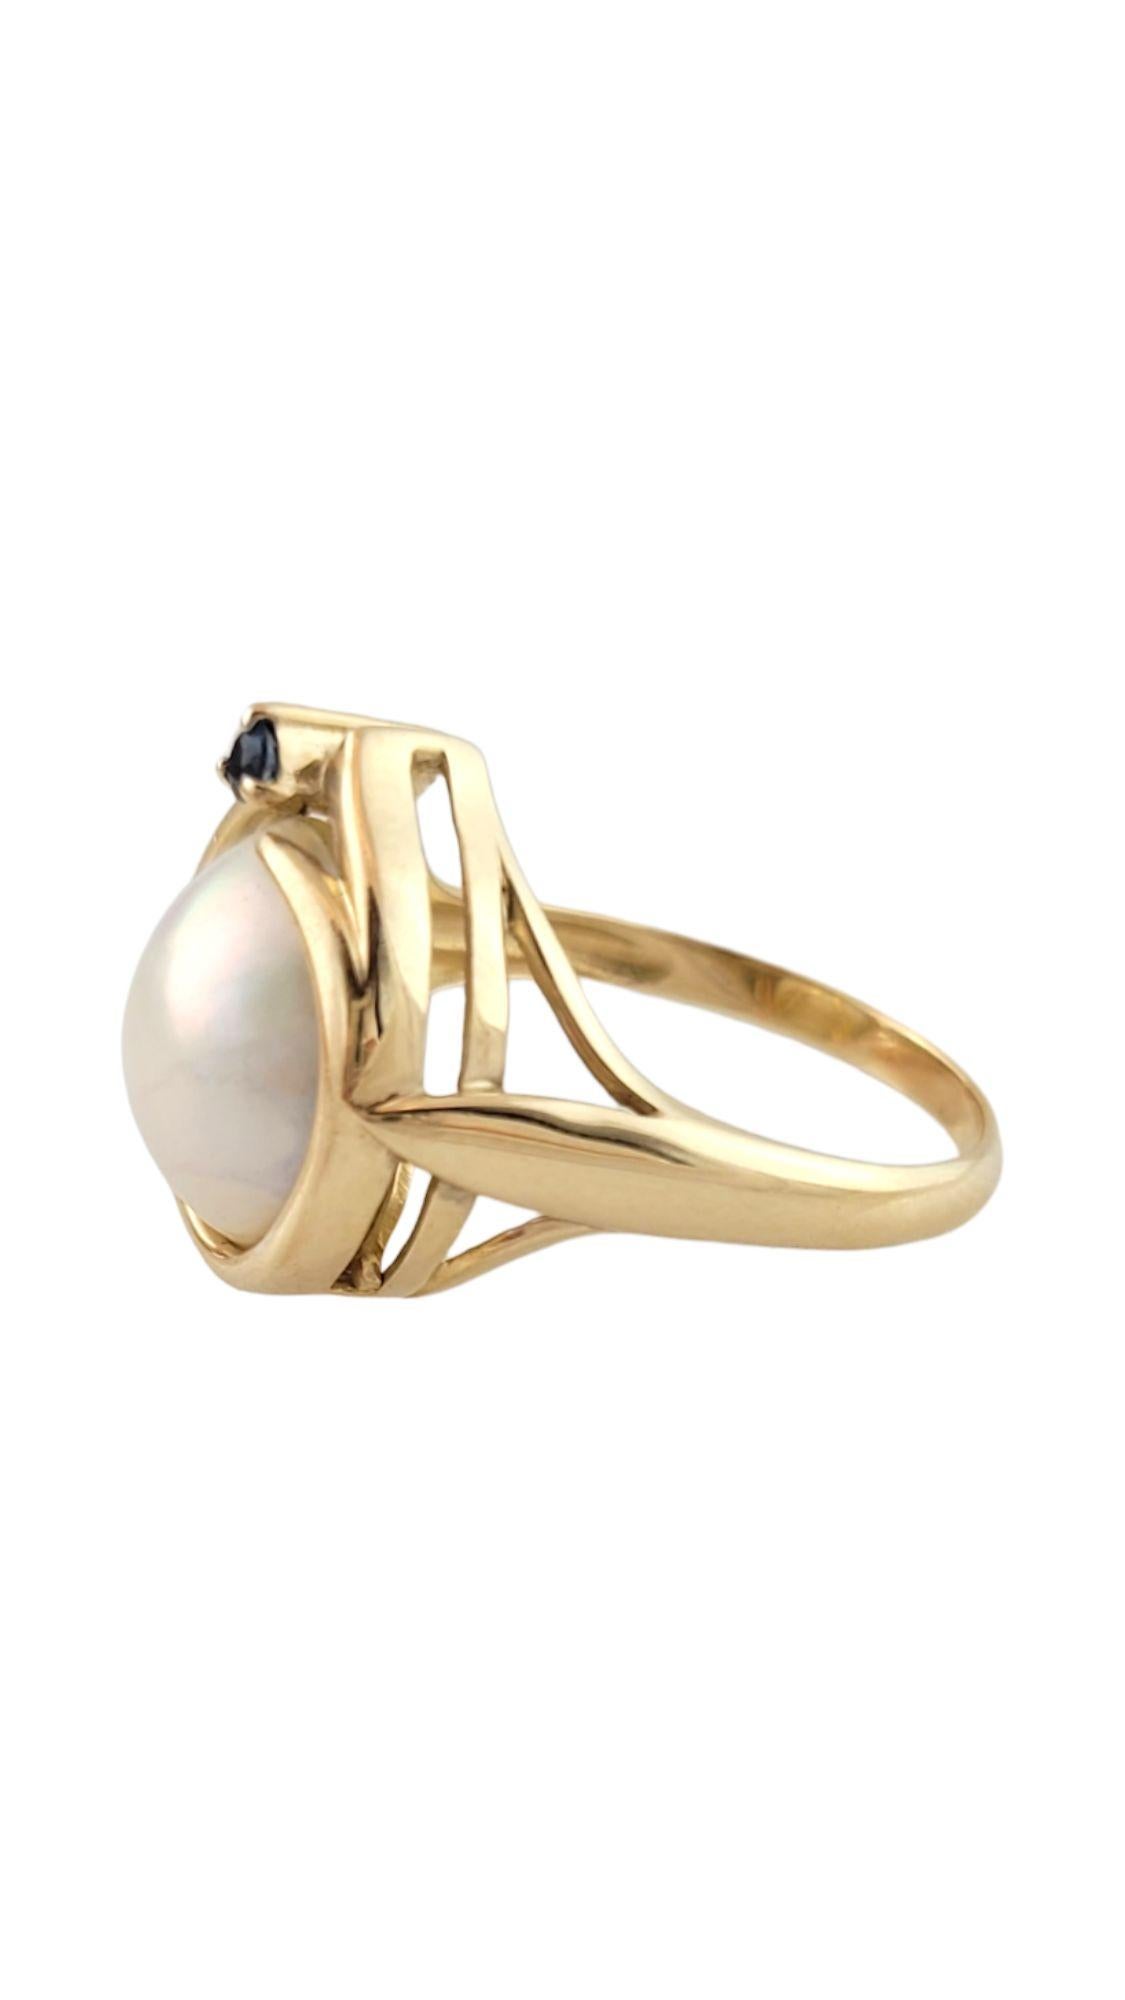 This gorgeous 14K gold ring is decorated with a beautiful Mabe pearl and a sparkling blue sapphire for a bold and beautiful look!

Pearl: 11.9mm

Ring size: 8.5

Shank: 2mm

Front: 16.4mm X 14.7mm X 8mm

Weight: 4.15 g/ 2.7 dwt

Hallmark: 14K

Very